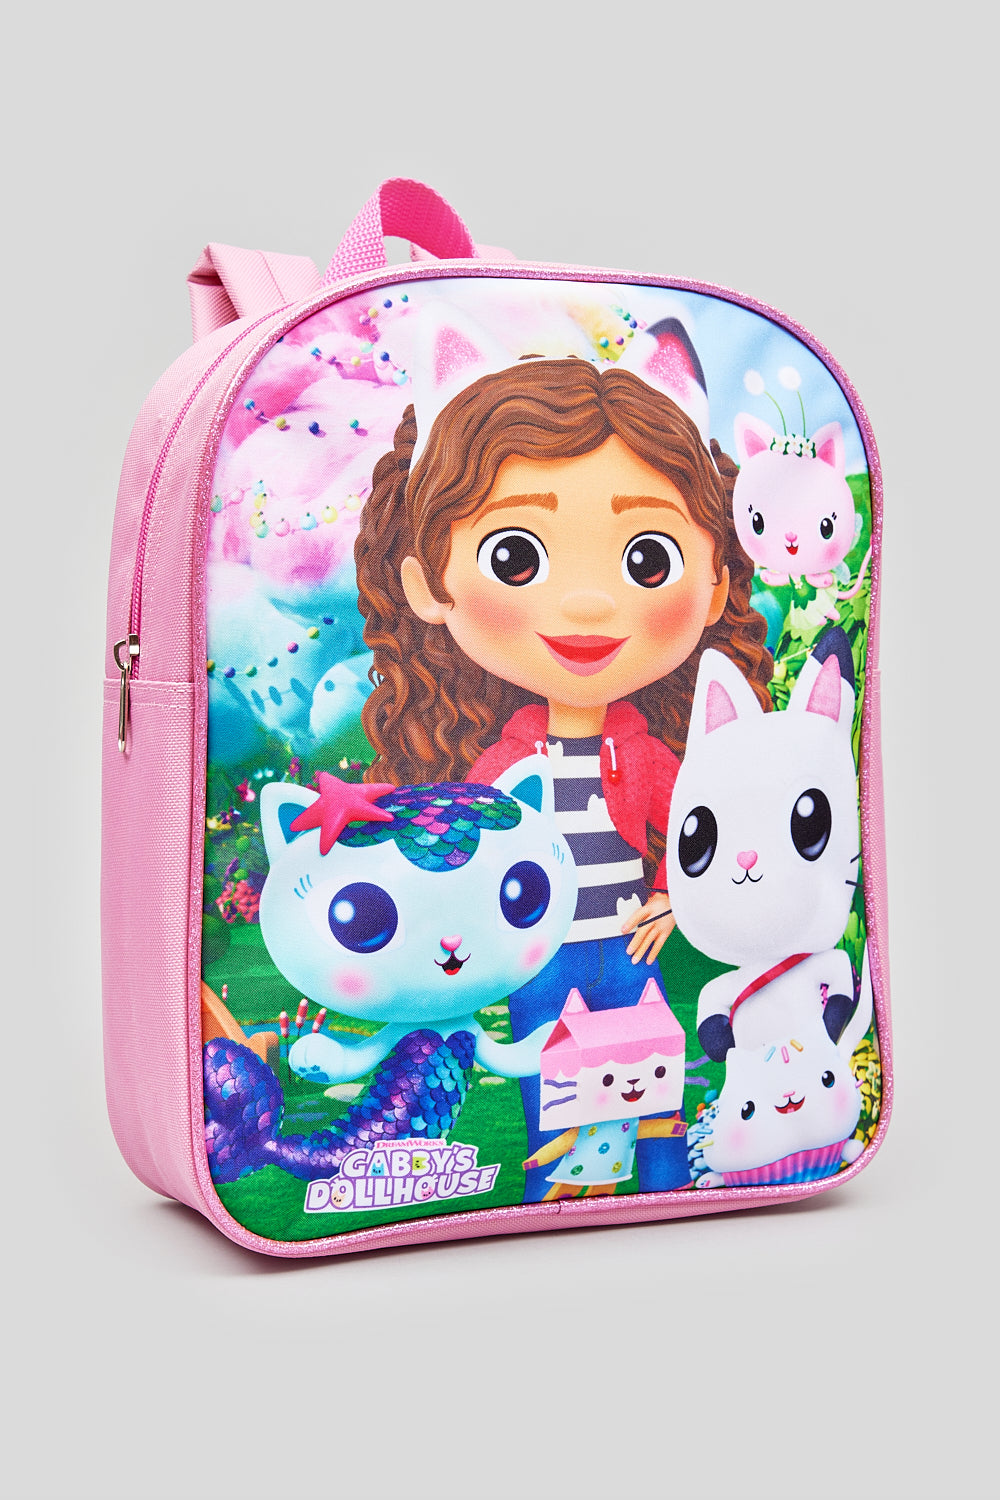 GABBY’S DOLL HOUSE ‘GABBY CATS’ PV BACKPACK